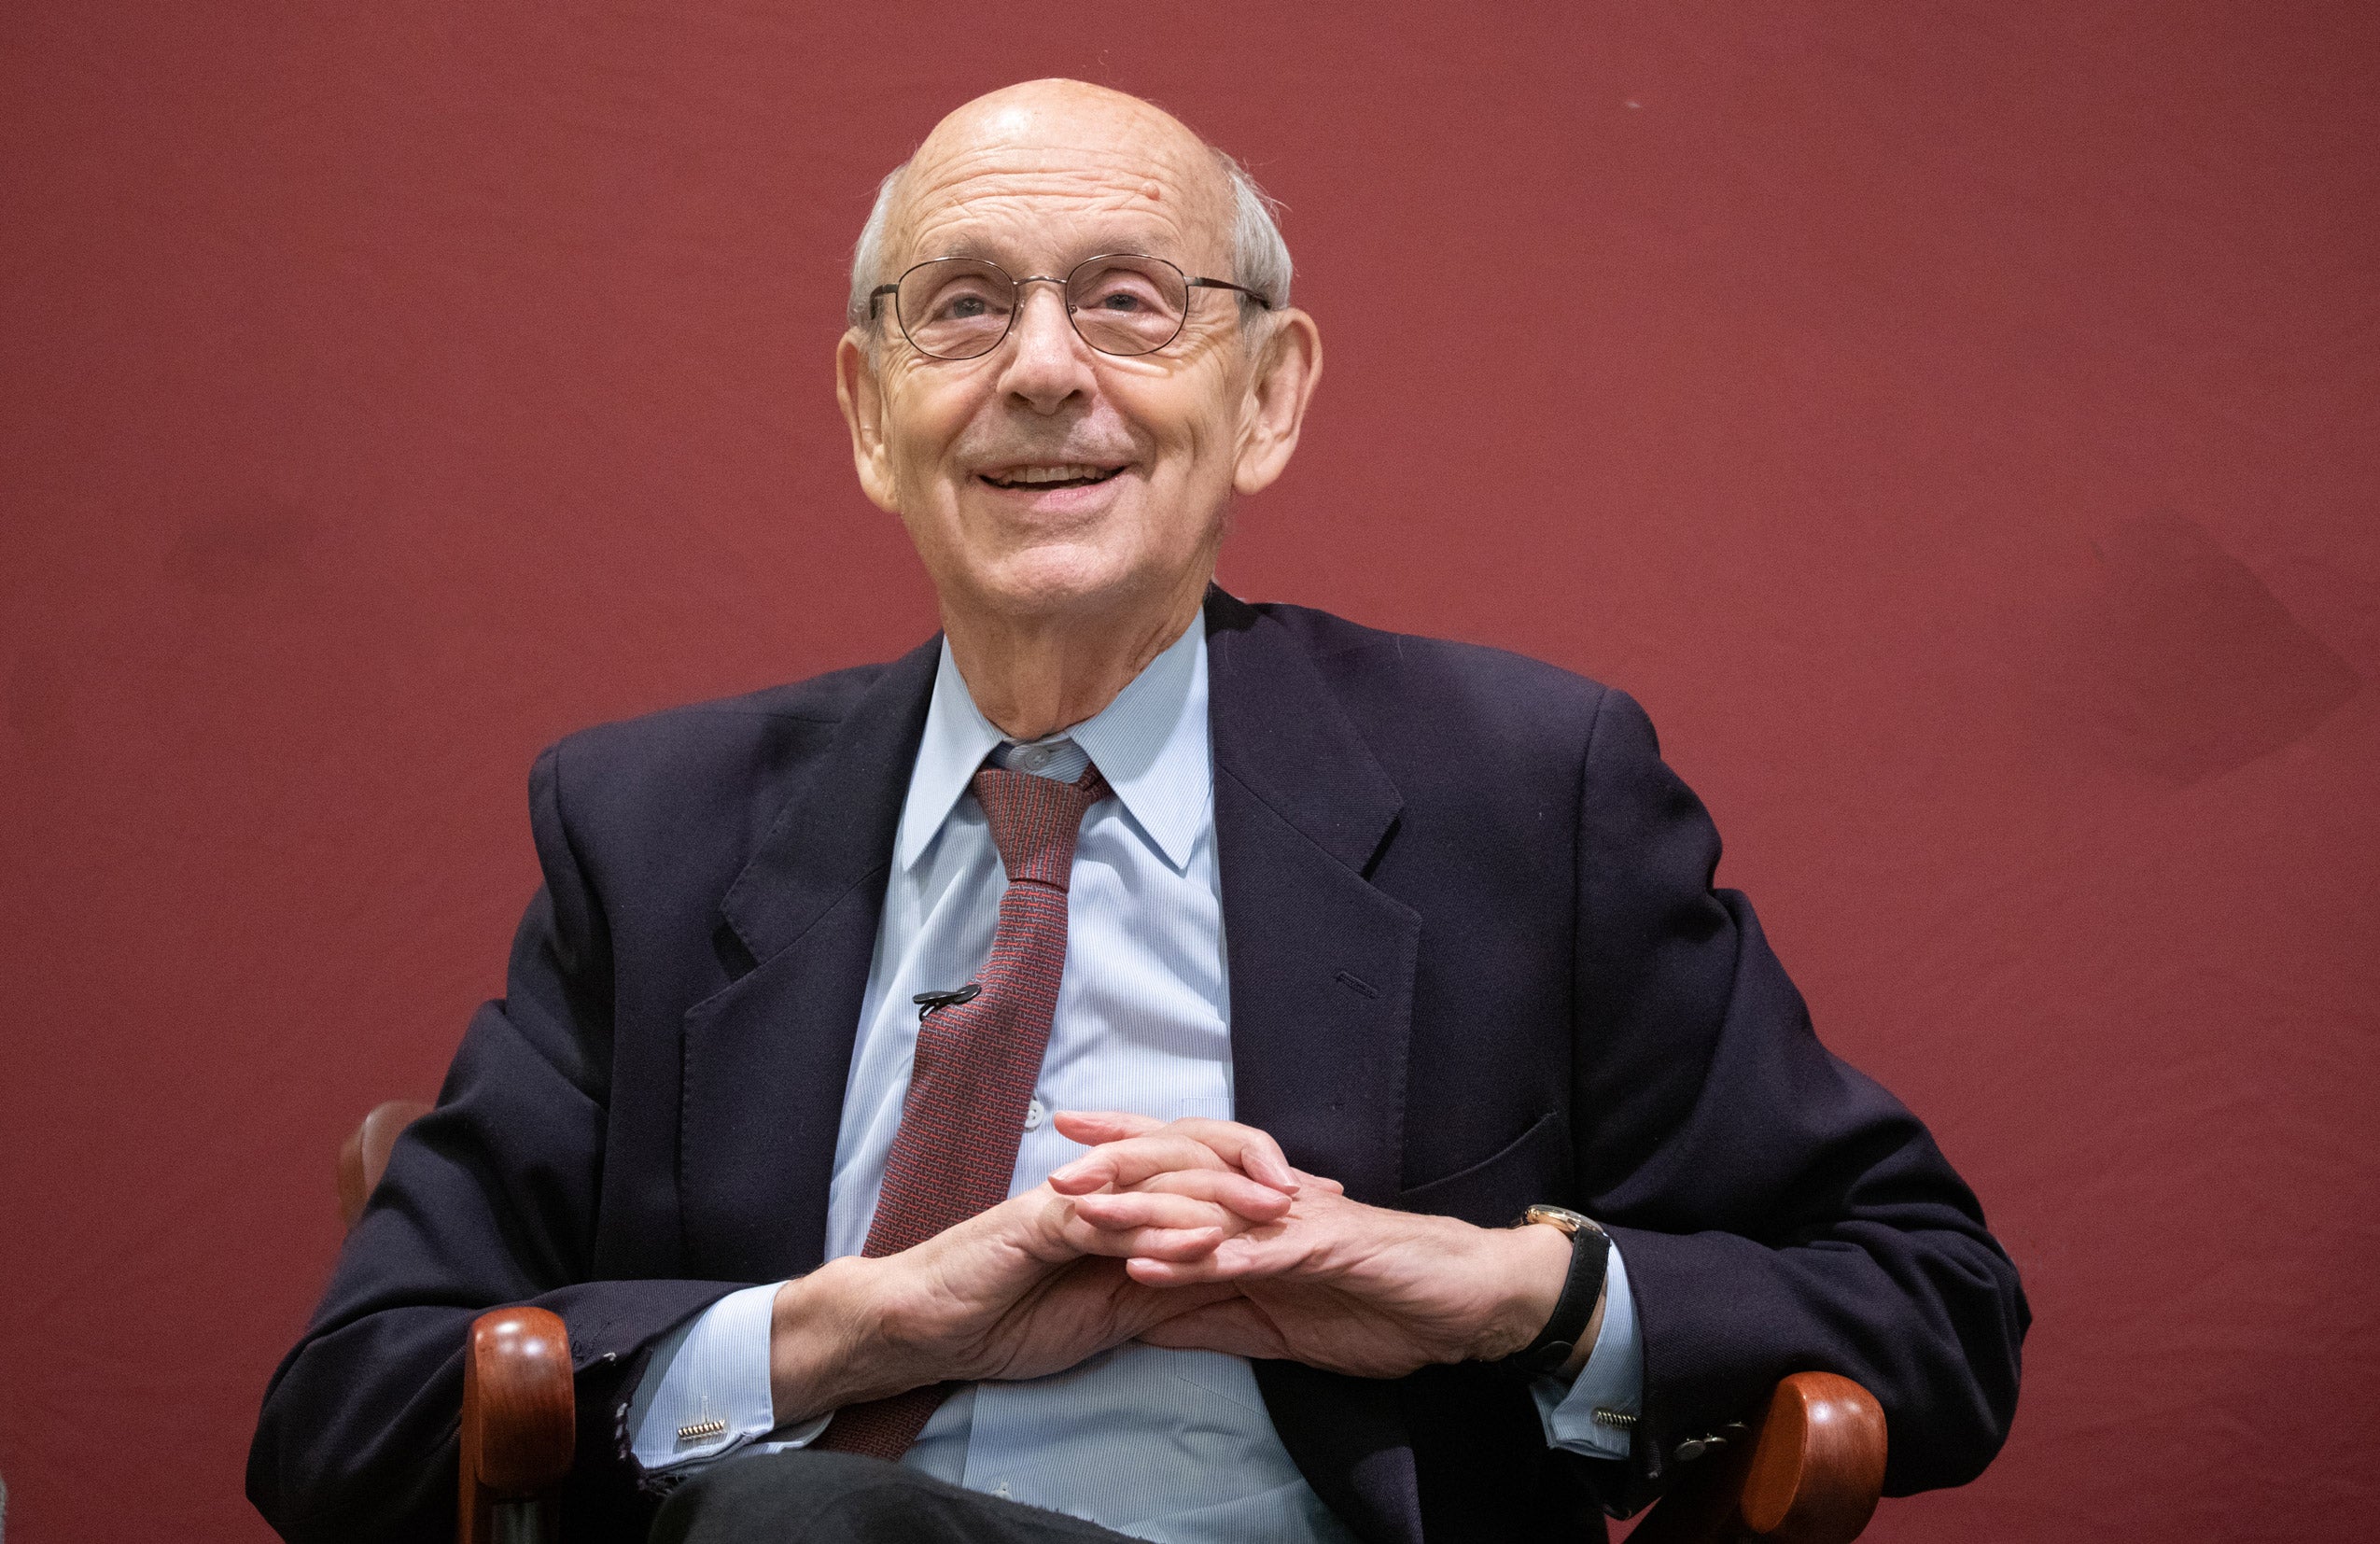 Justice Stephen G. Breyer sitting in a chair in front of a crimson background